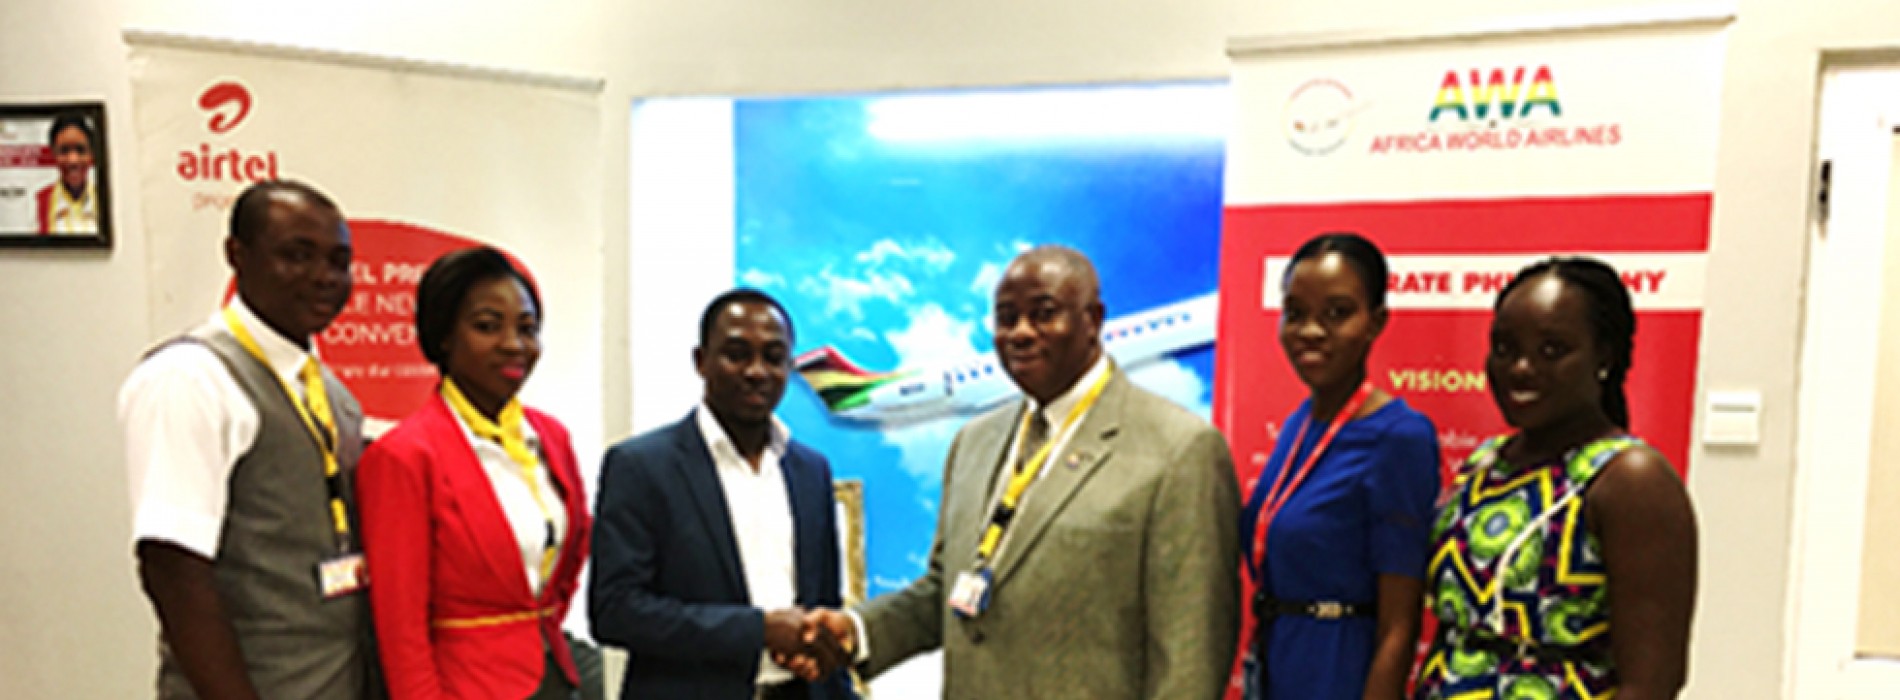 Airtel Ghana offers Africa World Airlines fare discounts